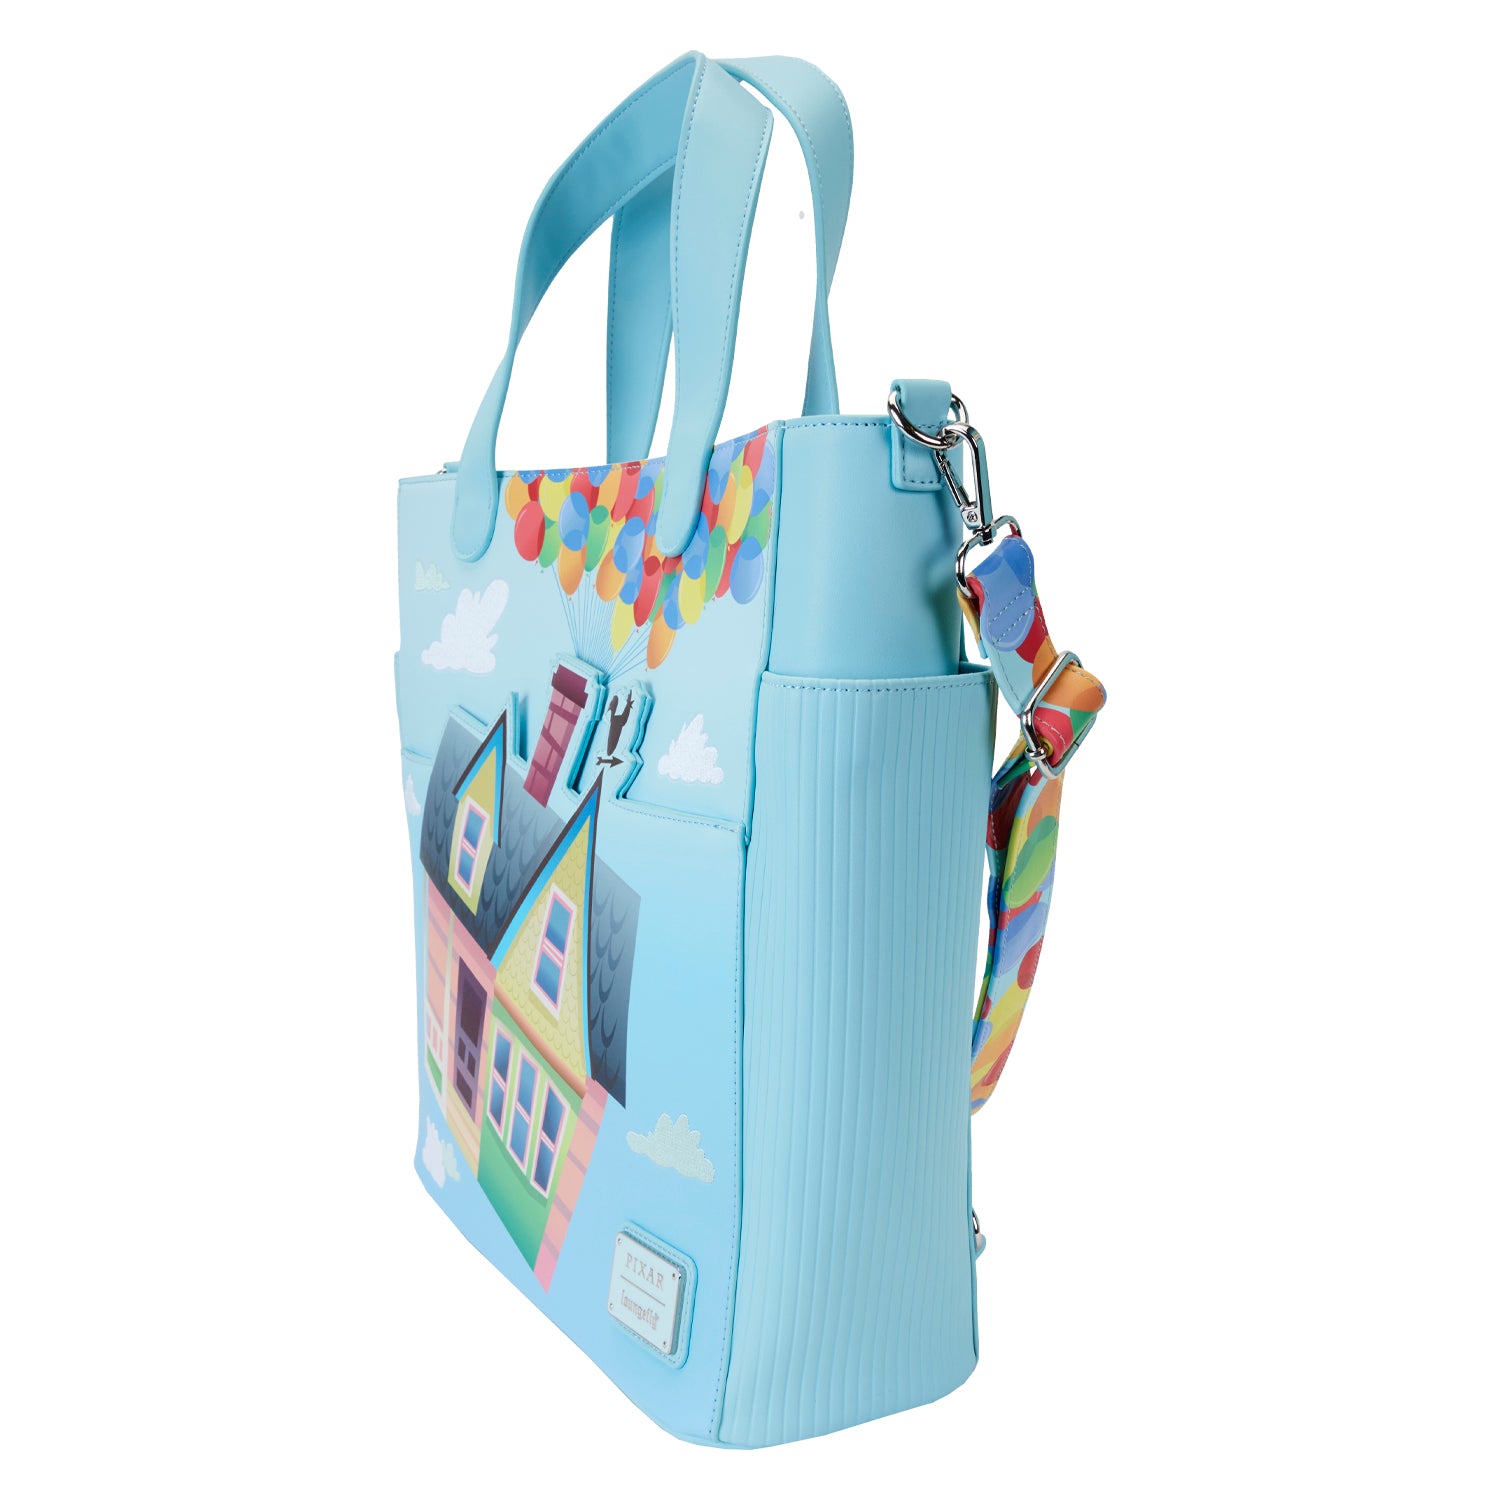 Loungefly x Pixar Up 15th Anniversary Convertible Tote Bag